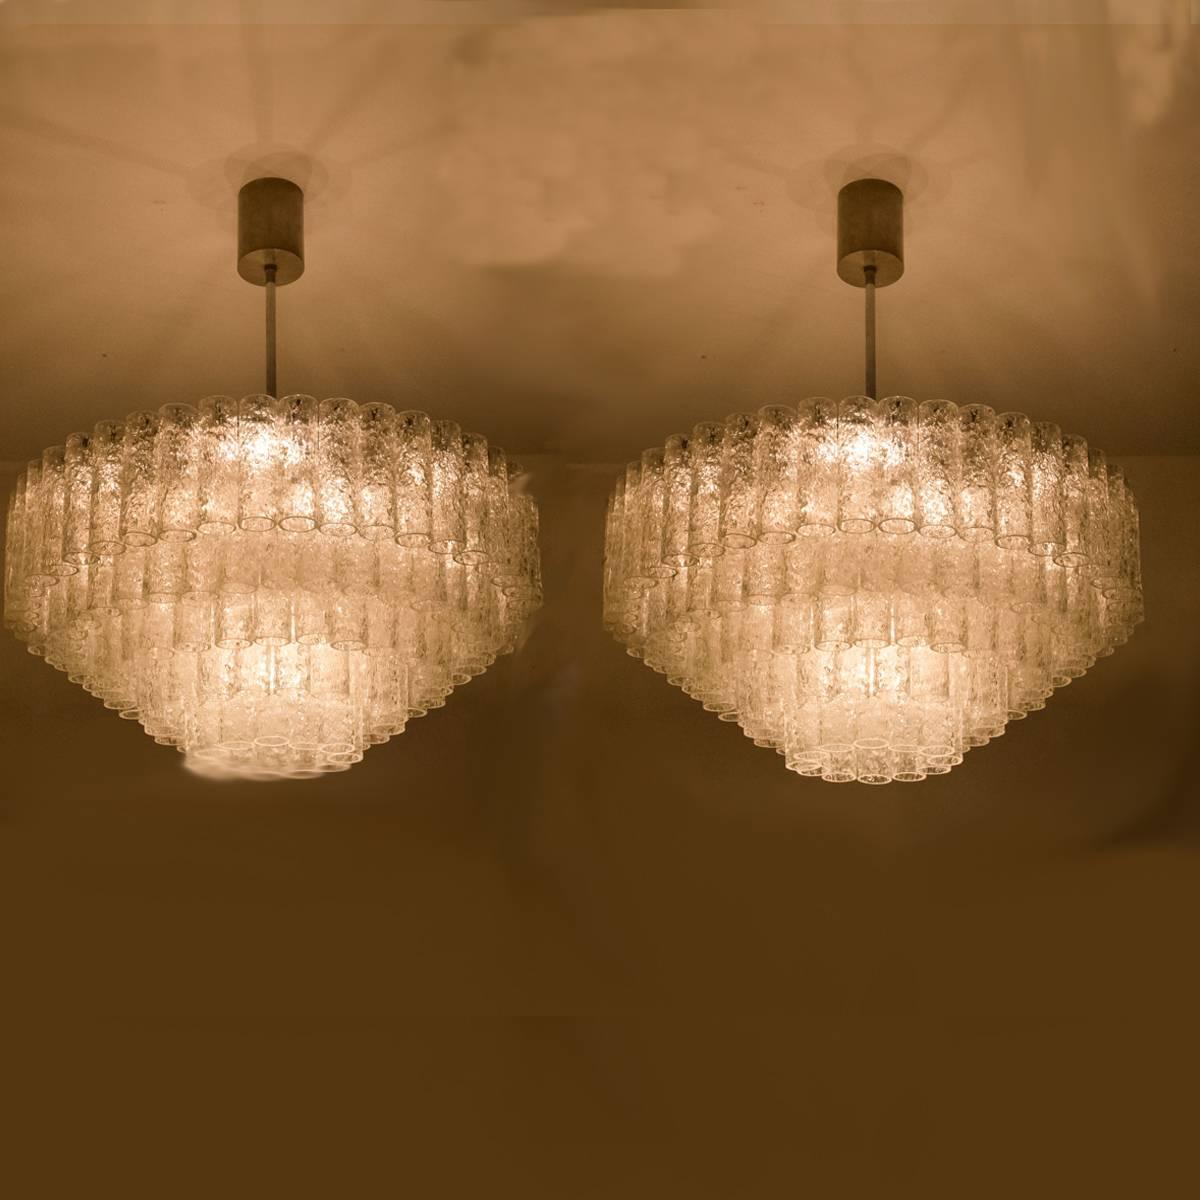 A pair of giant ballroom tube chandeliers by Doria Leuchten from the 1960s. Minimalistic design executed with a taste for excellence in craftsmanship. The chandeliers are not only functional as light source but also as a sculptural component. The